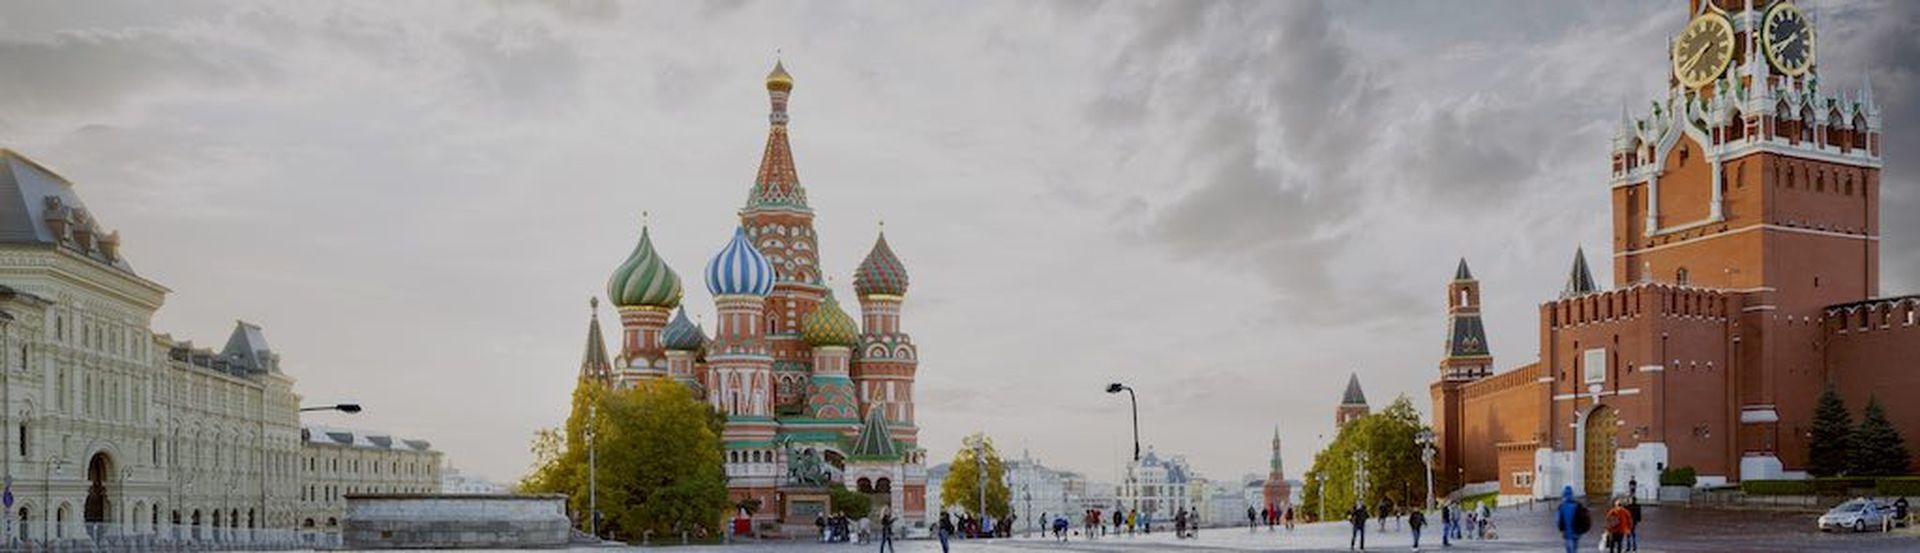 Panorama of Red Square in Moscow, Russia